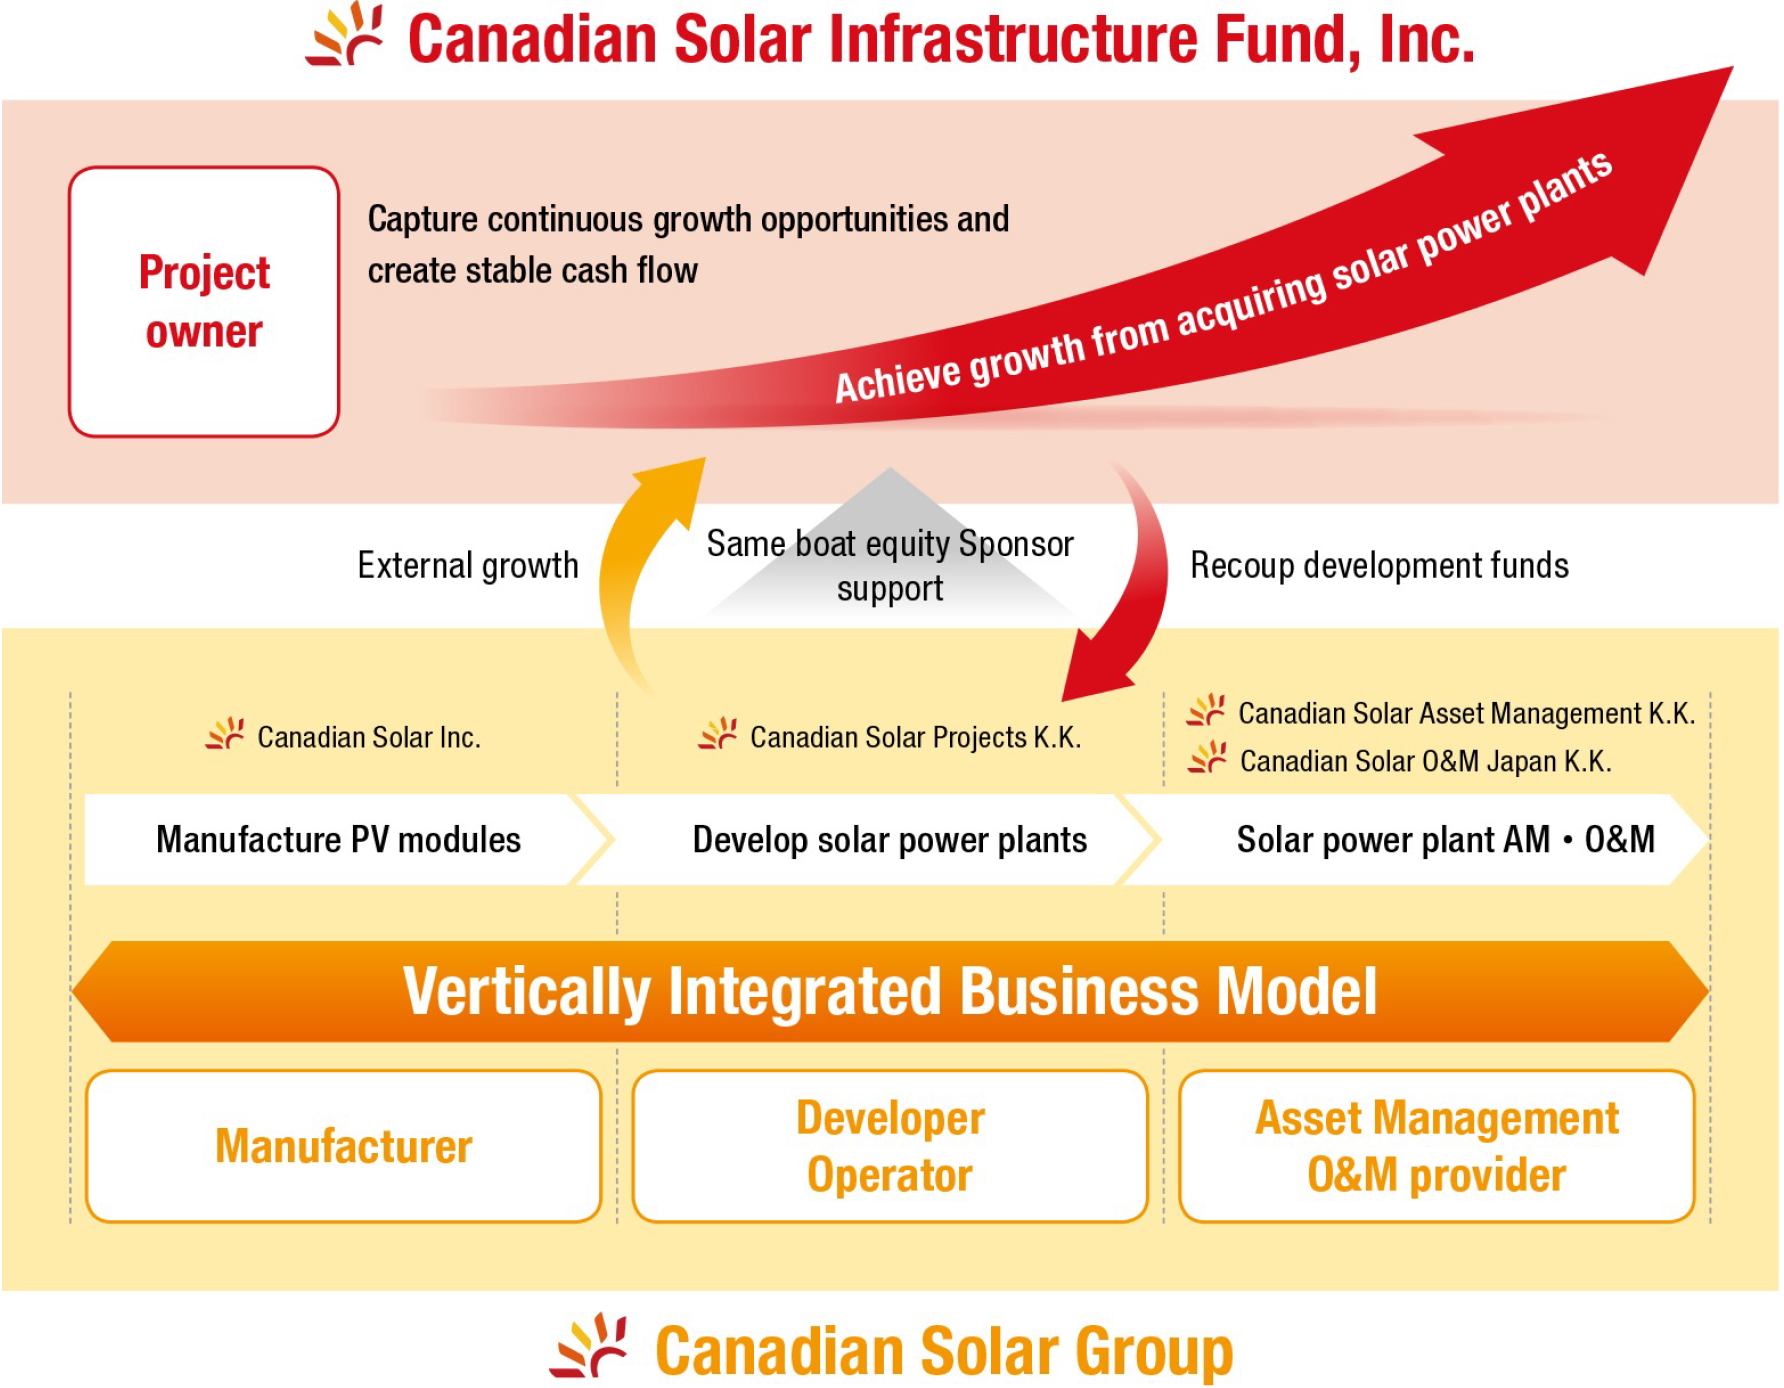 The image of the value chain of renewable energy business at Canadian Solar Group